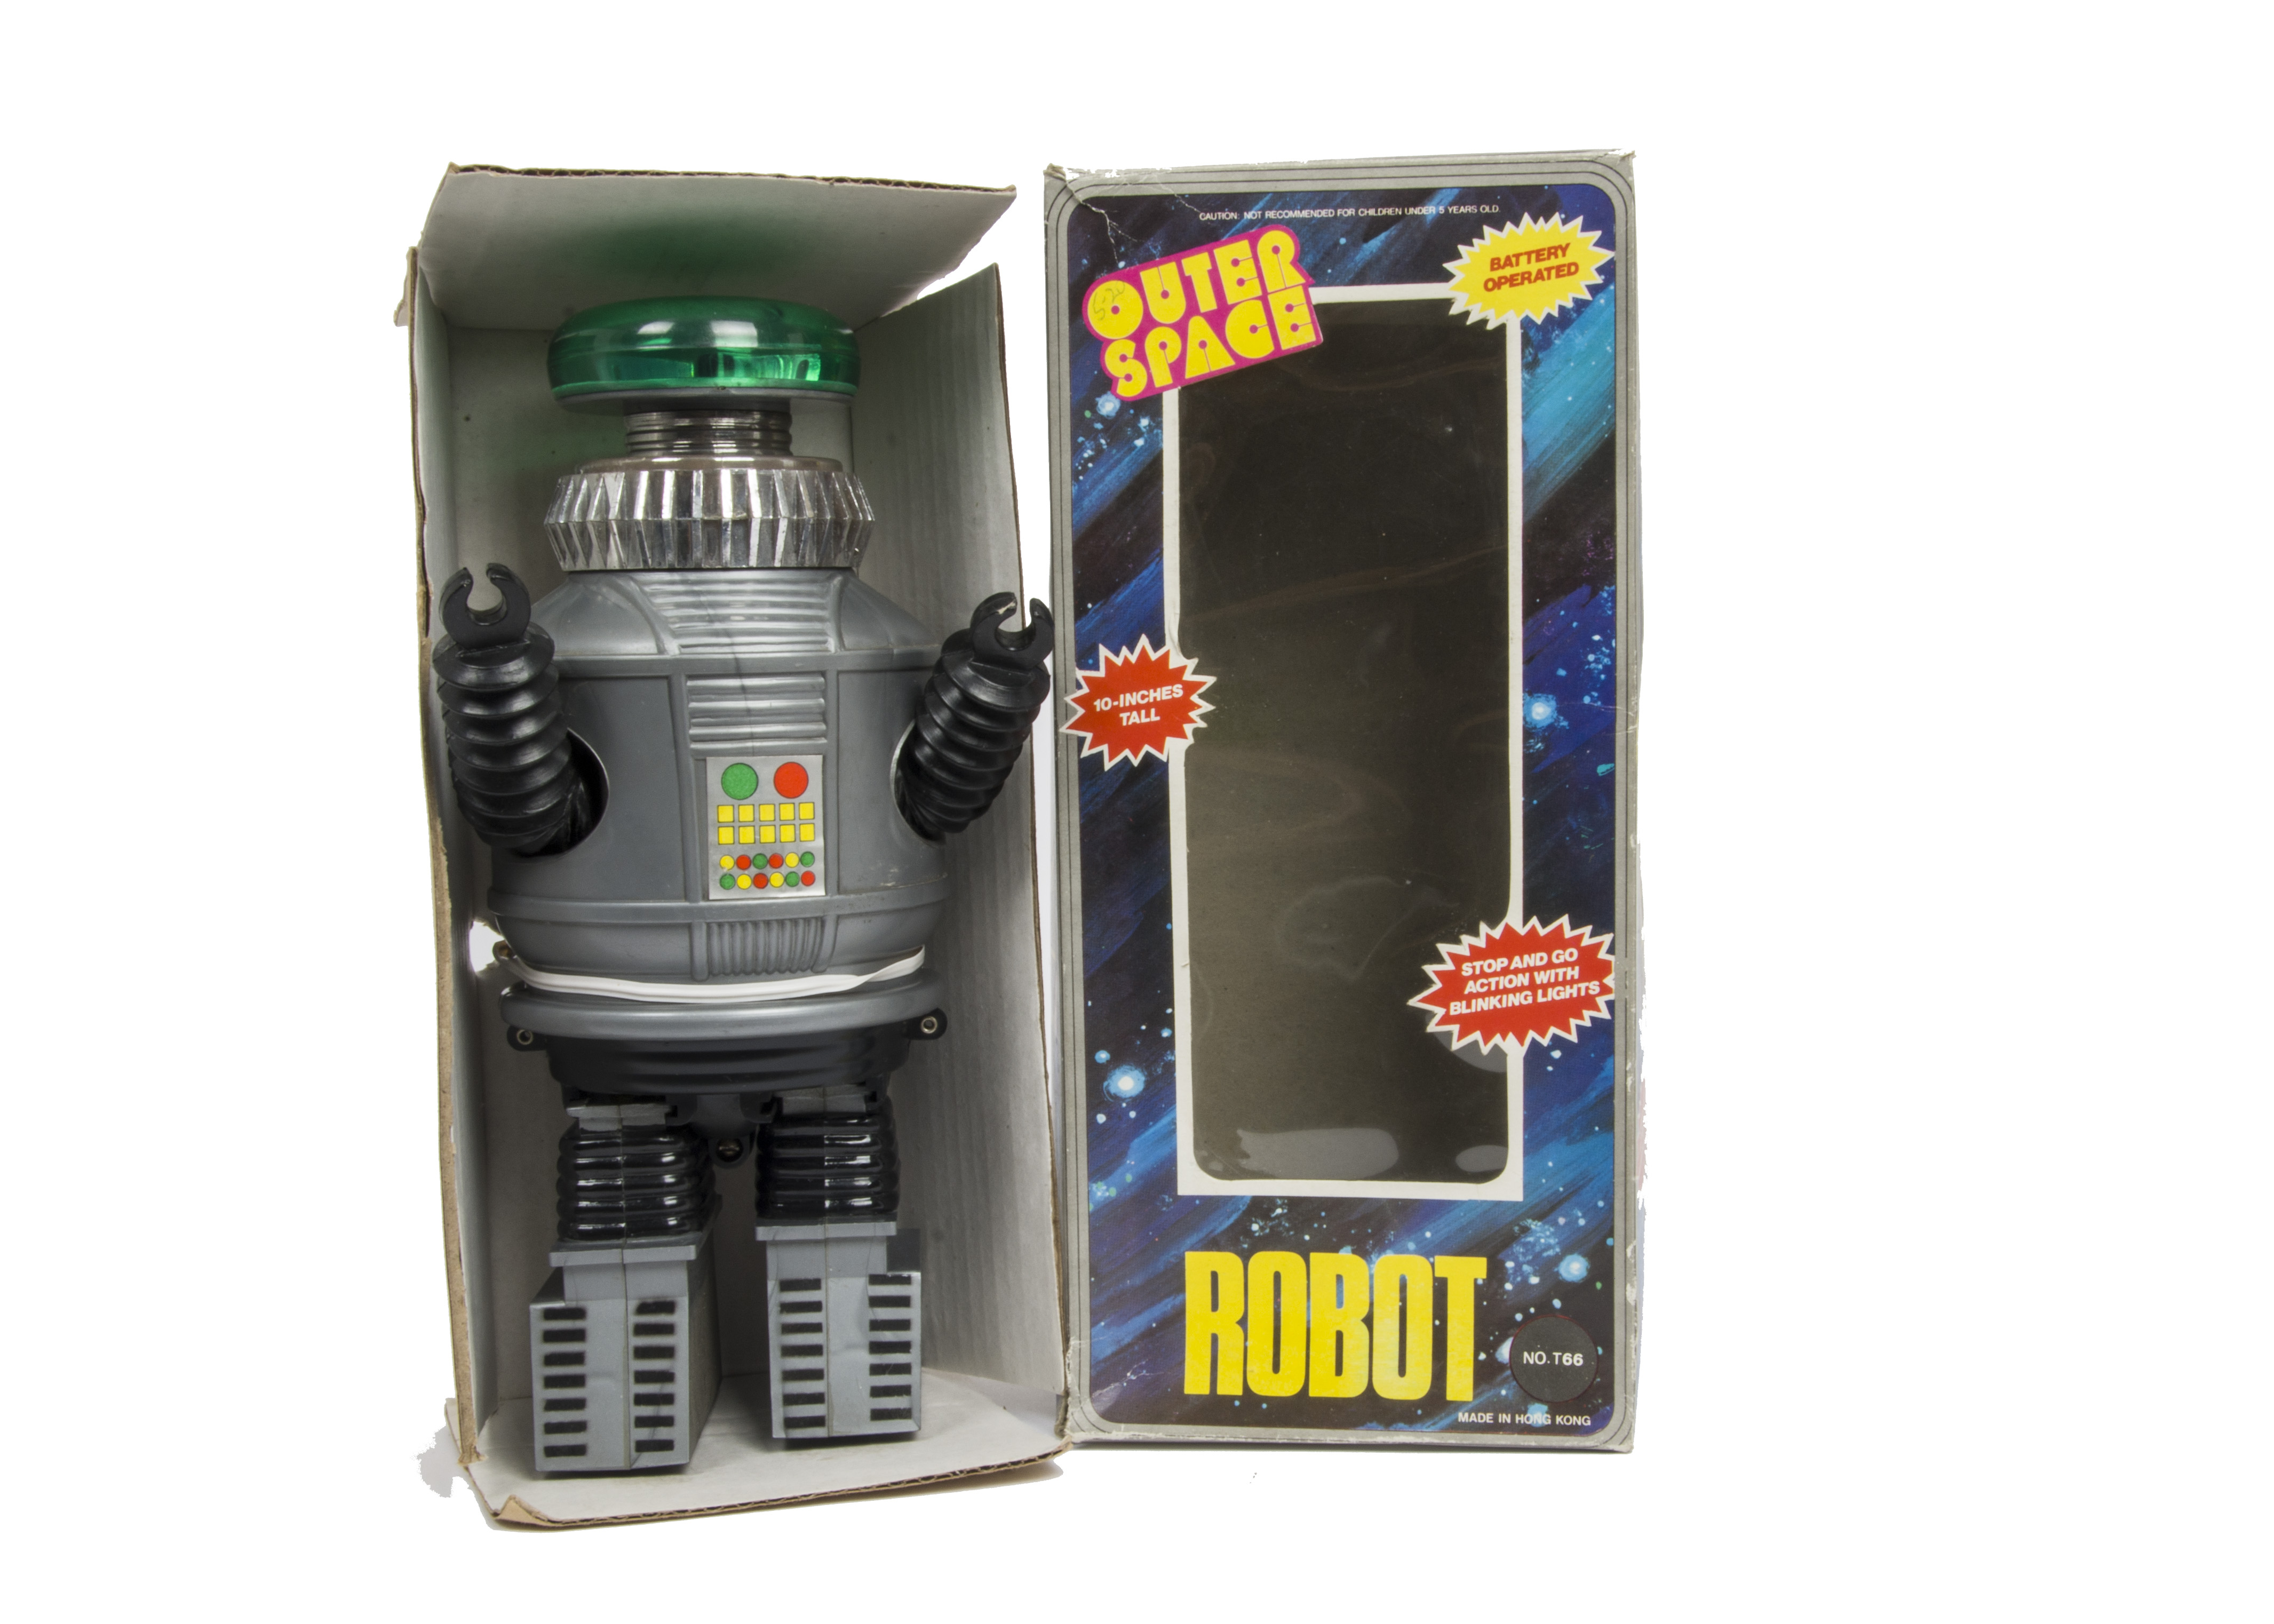 AHI (Hong Kong) Battery-operated Outer Space Robot, later use of earlier Lost In Space YM3 robot